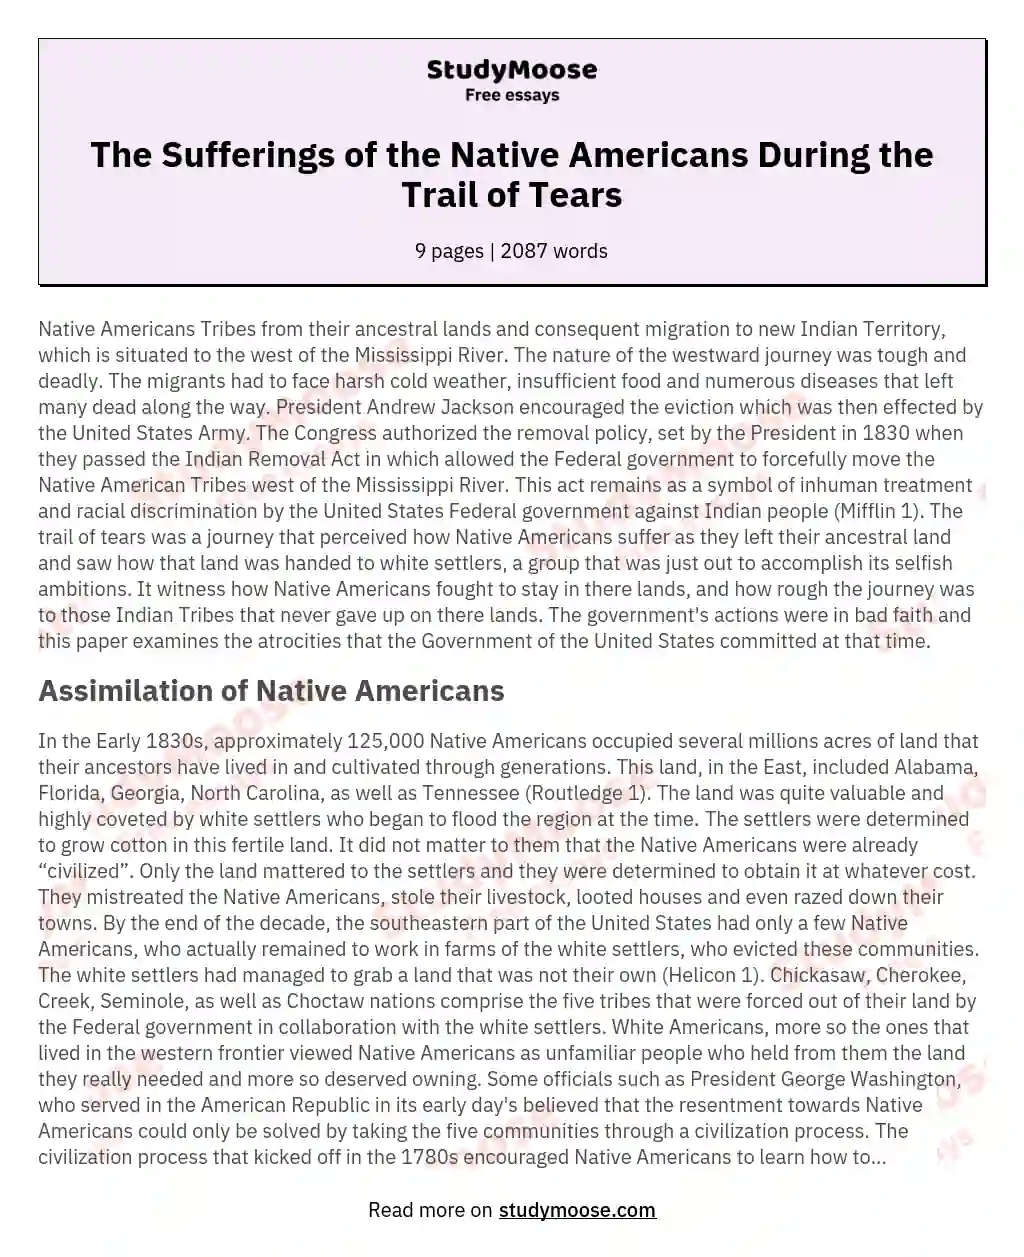 The Sufferings of the Native Americans During the Trail of Tears essay